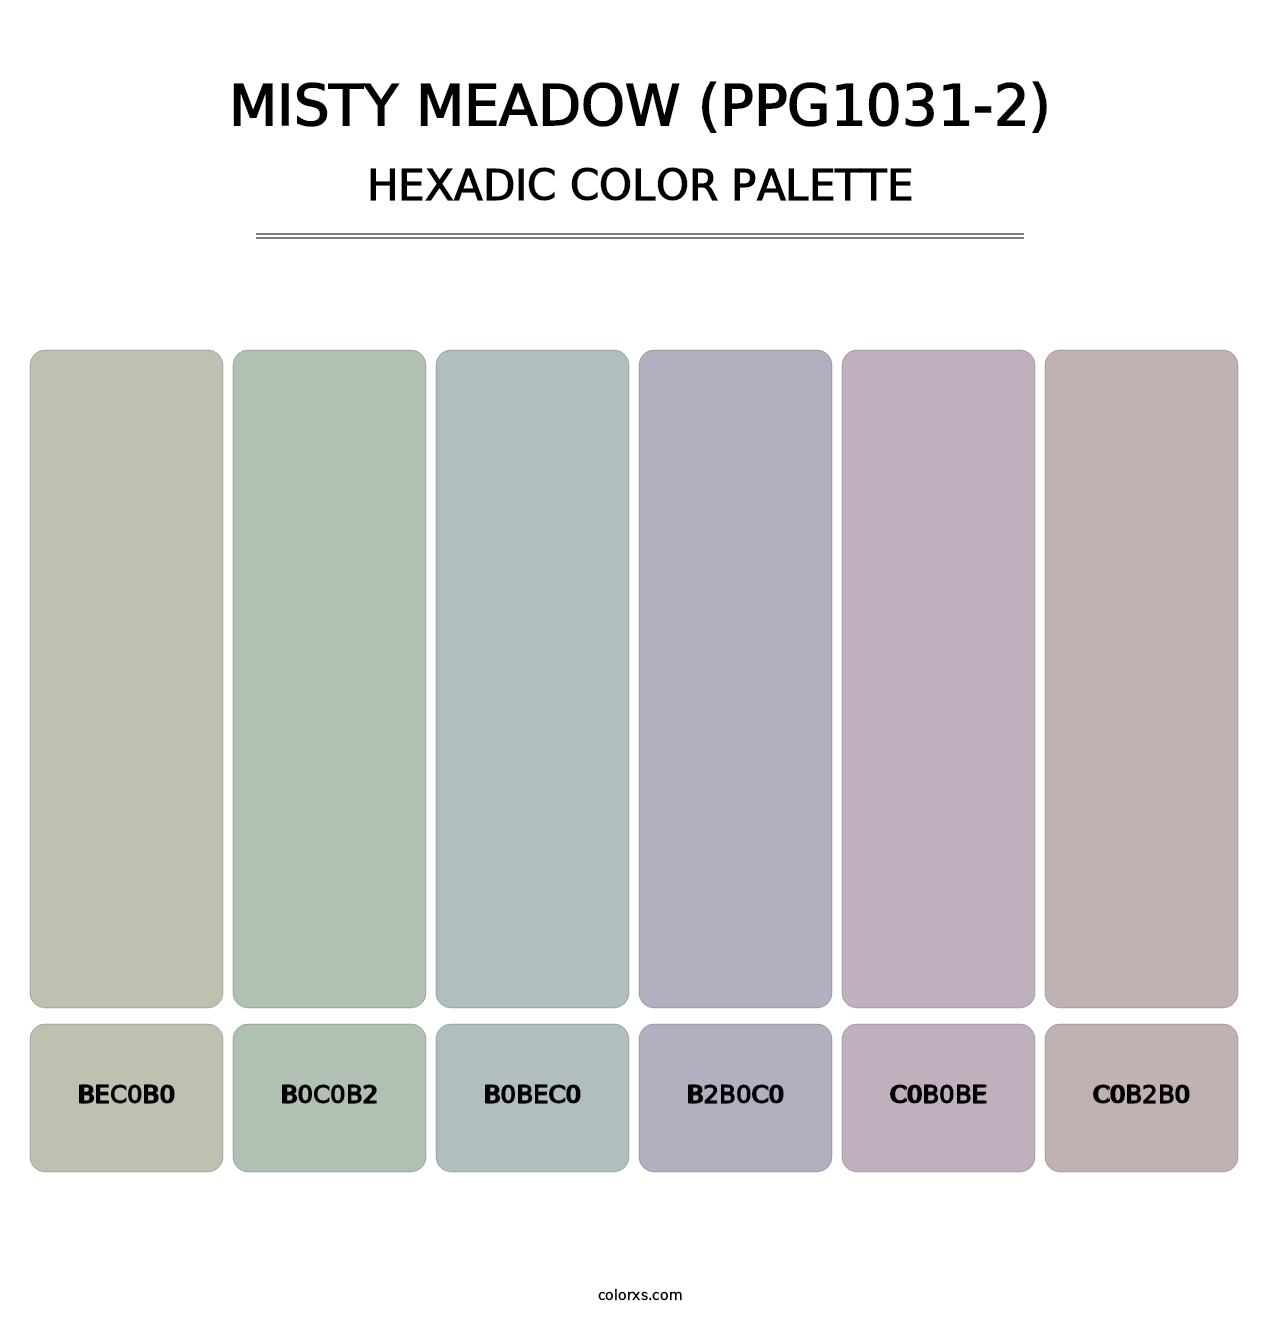 Misty Meadow (PPG1031-2) - Hexadic Color Palette